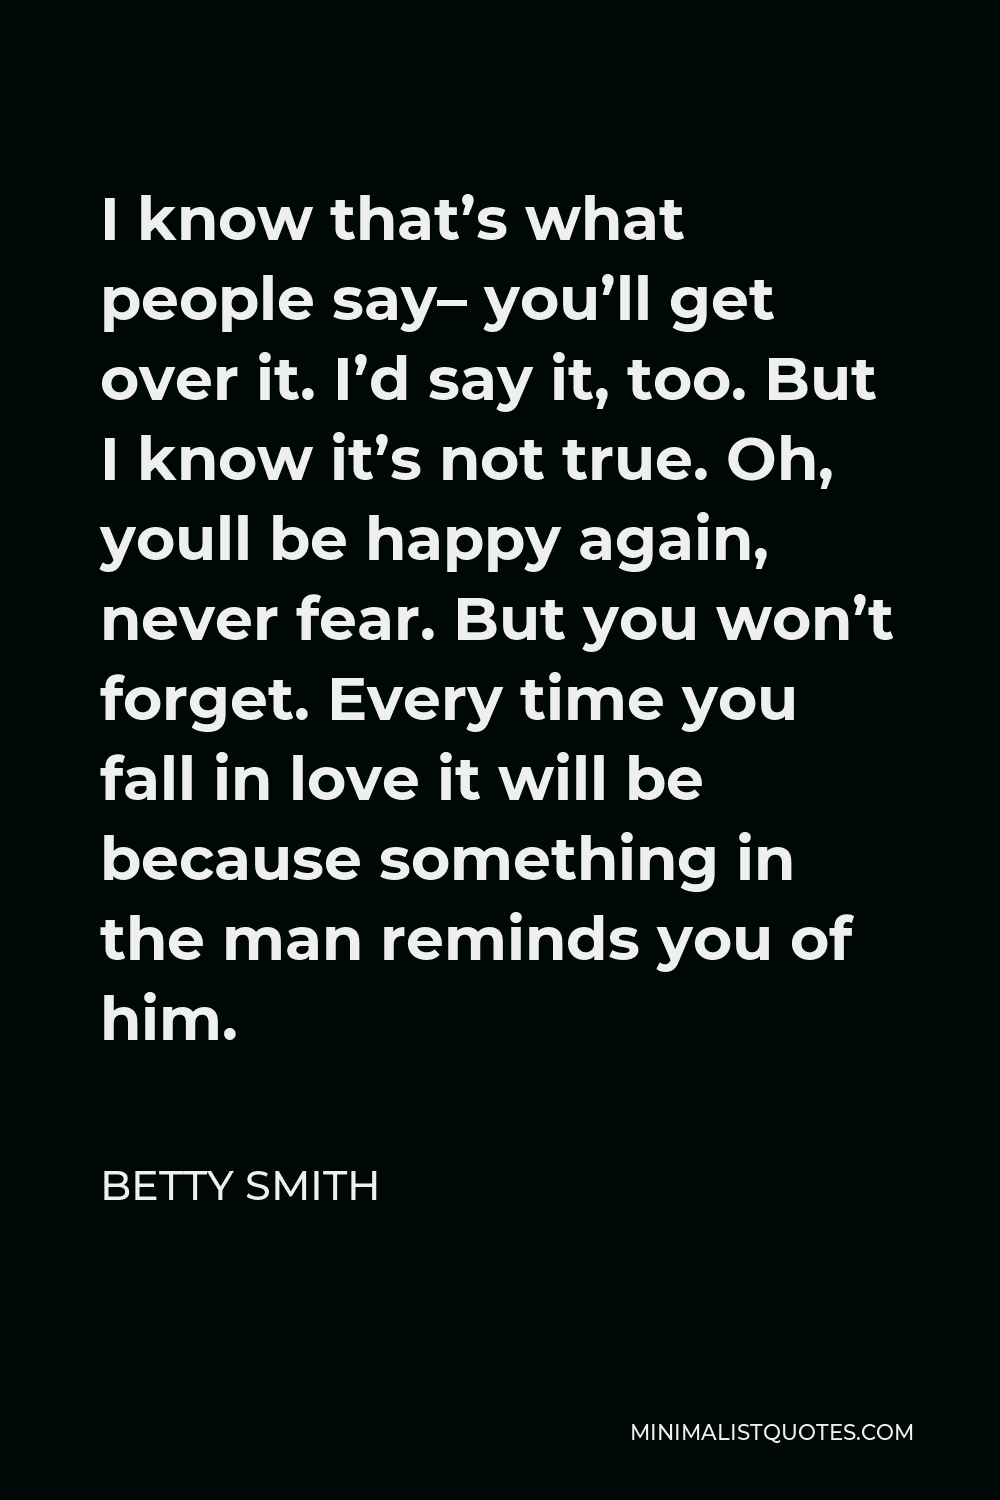 Betty Smith Quote - I know that’s what people say– you’ll get over it. I’d say it, too. But I know it’s not true. Oh, youll be happy again, never fear. But you won’t forget. Every time you fall in love it will be because something in the man reminds you of him.